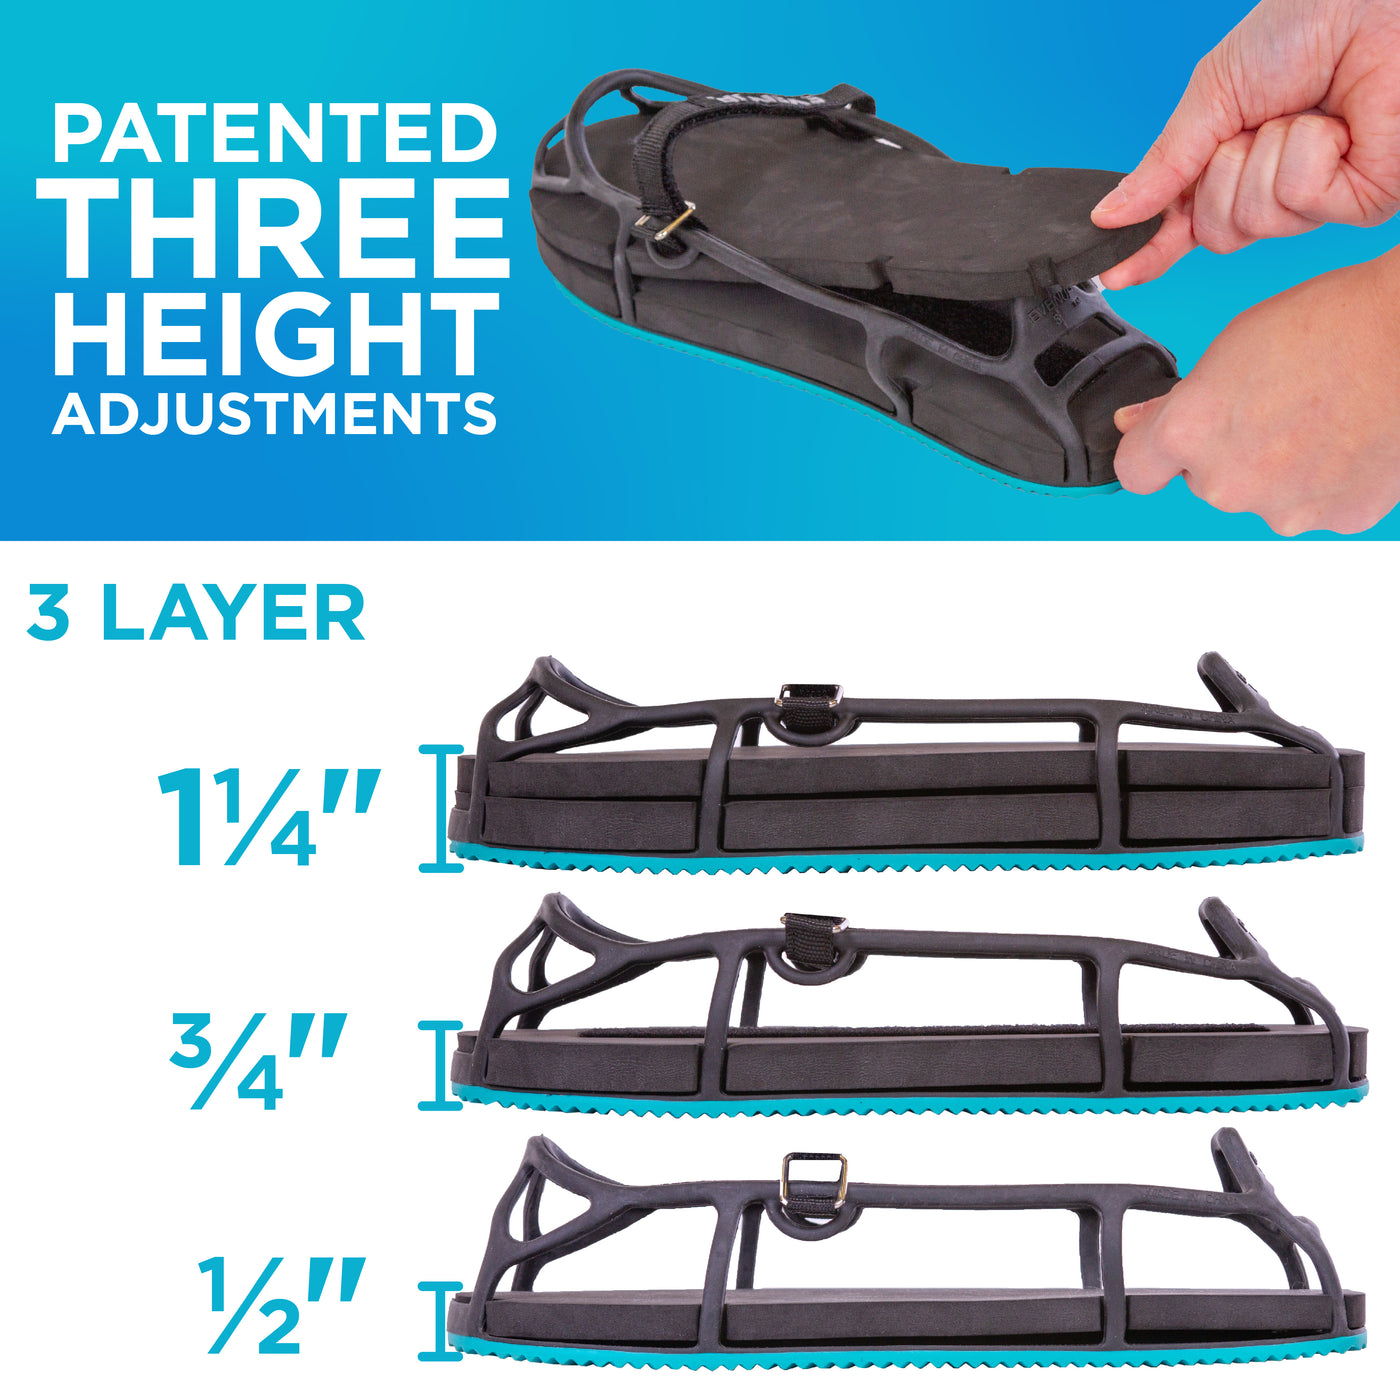 Our shoe lifts for uneven legs can be adjust for one half inch of lift or one full inch